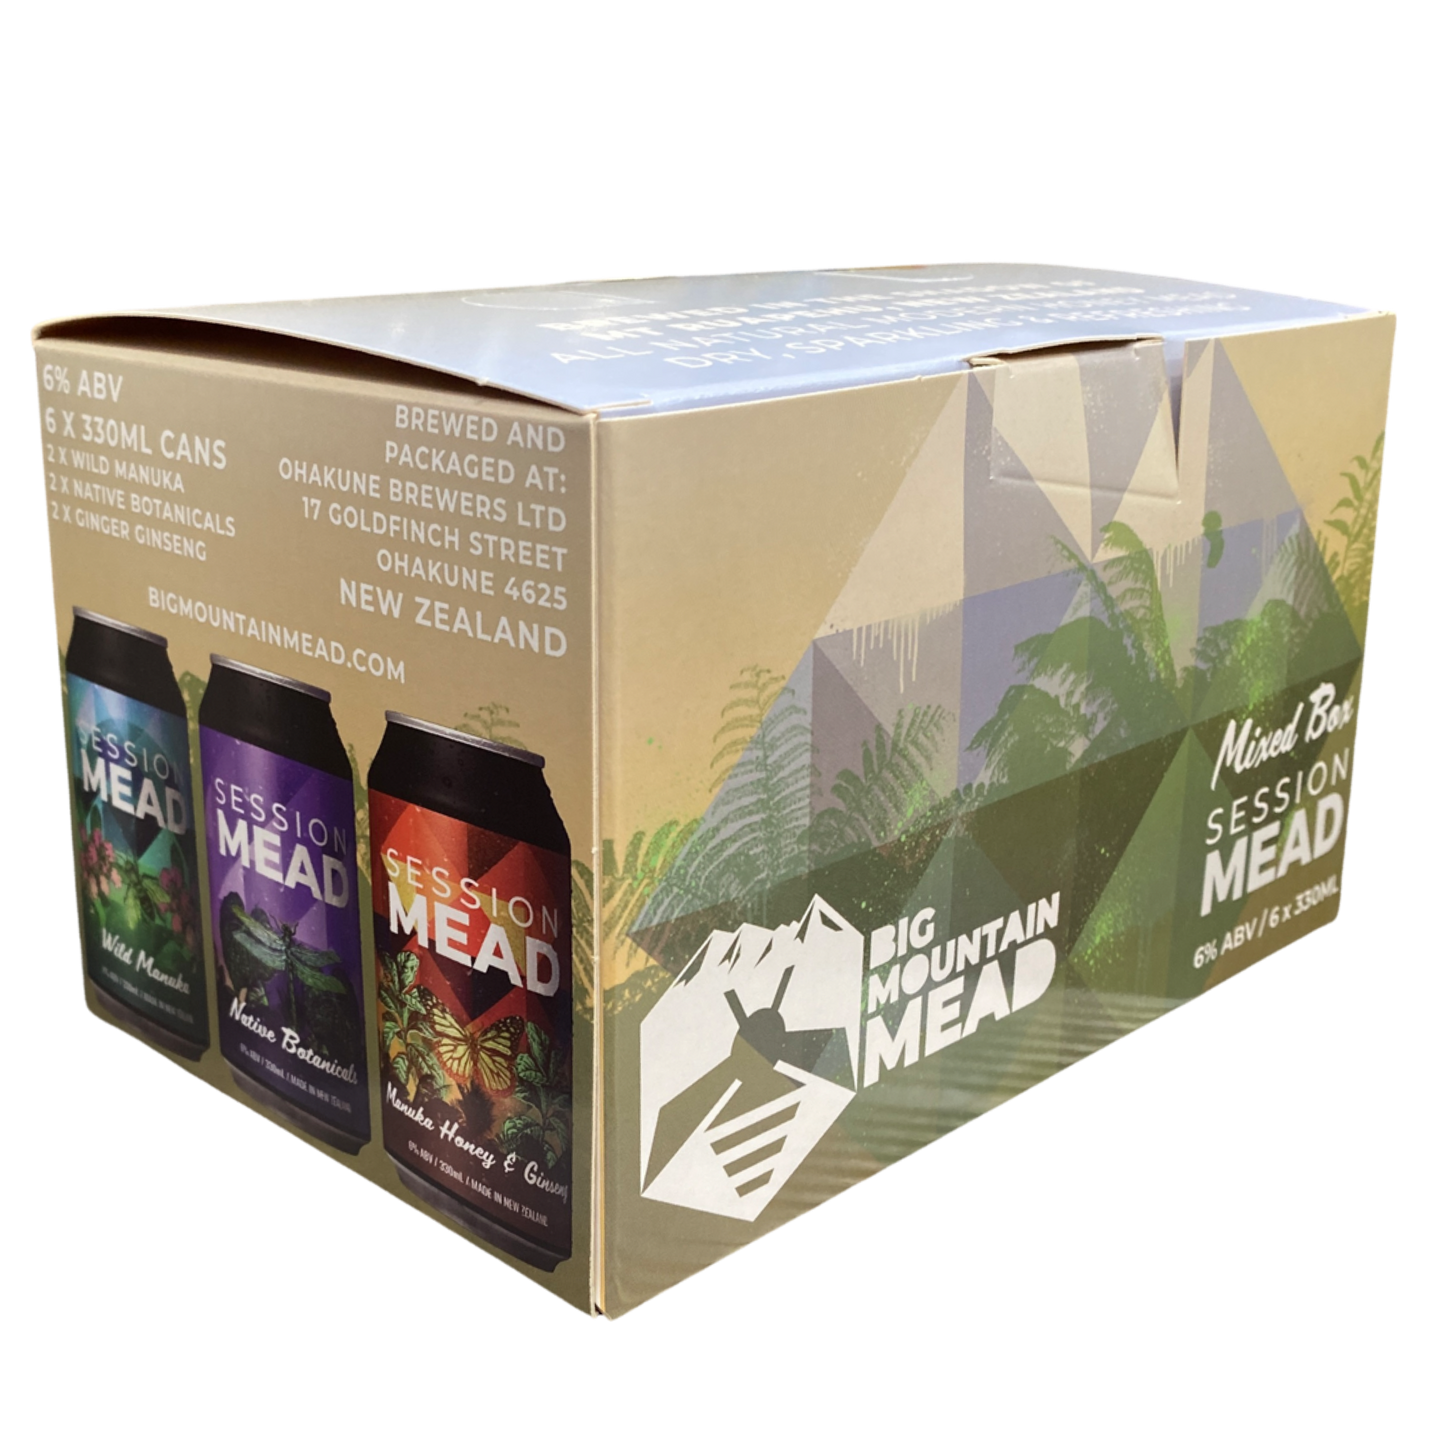 Mead Retail Mixed 6-PACK 330ml cans - Big Mountain Mead